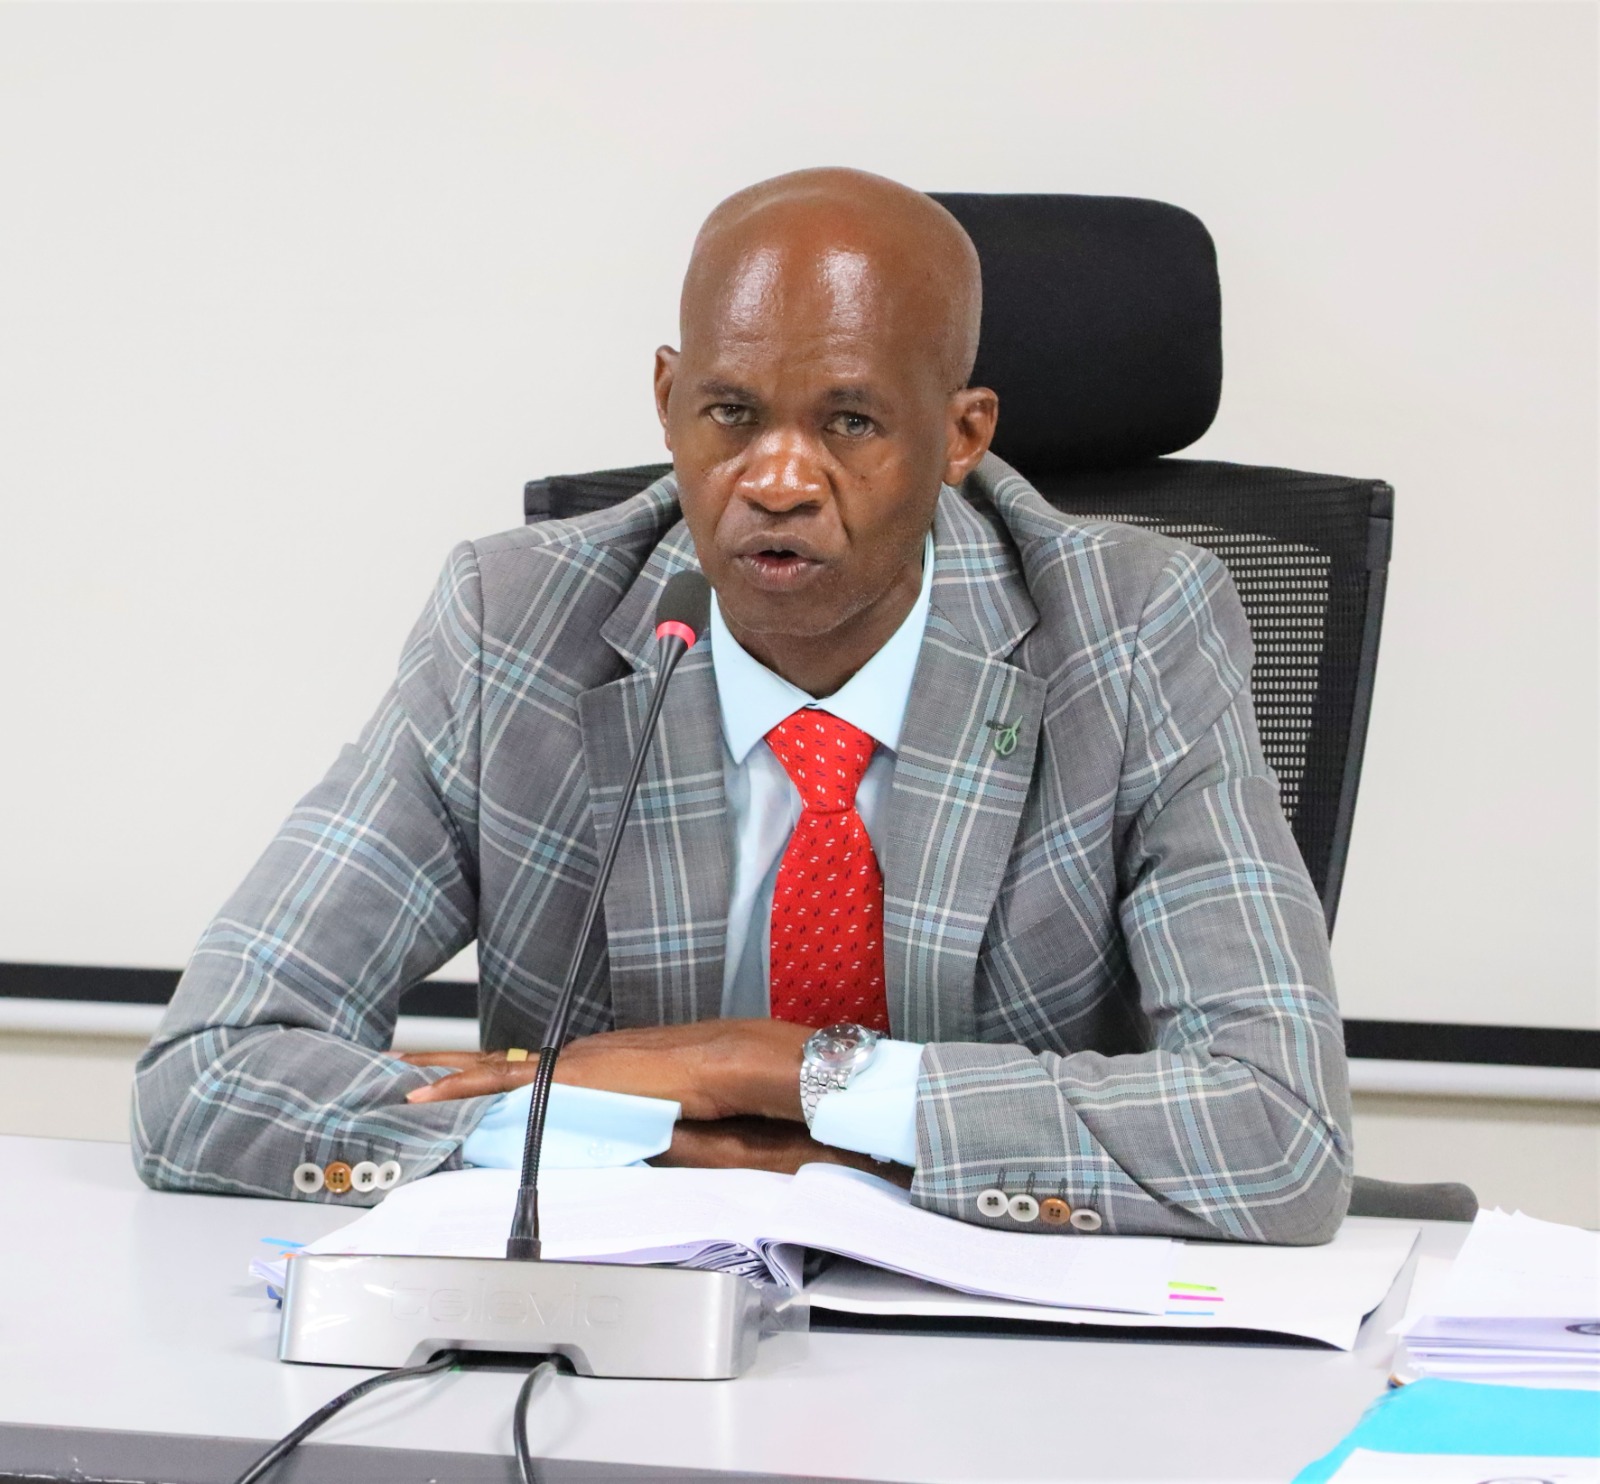 SENATE STANDING COMMITTEE ON AGRICULTURE,LIVESTOCK AND FISHERIES CONSIDERS A STATEMENT SOUGHT BY SEN. HAMIDA KIBWANA ON THE STATE OF NUT INDUSTRY IN KENYA. 